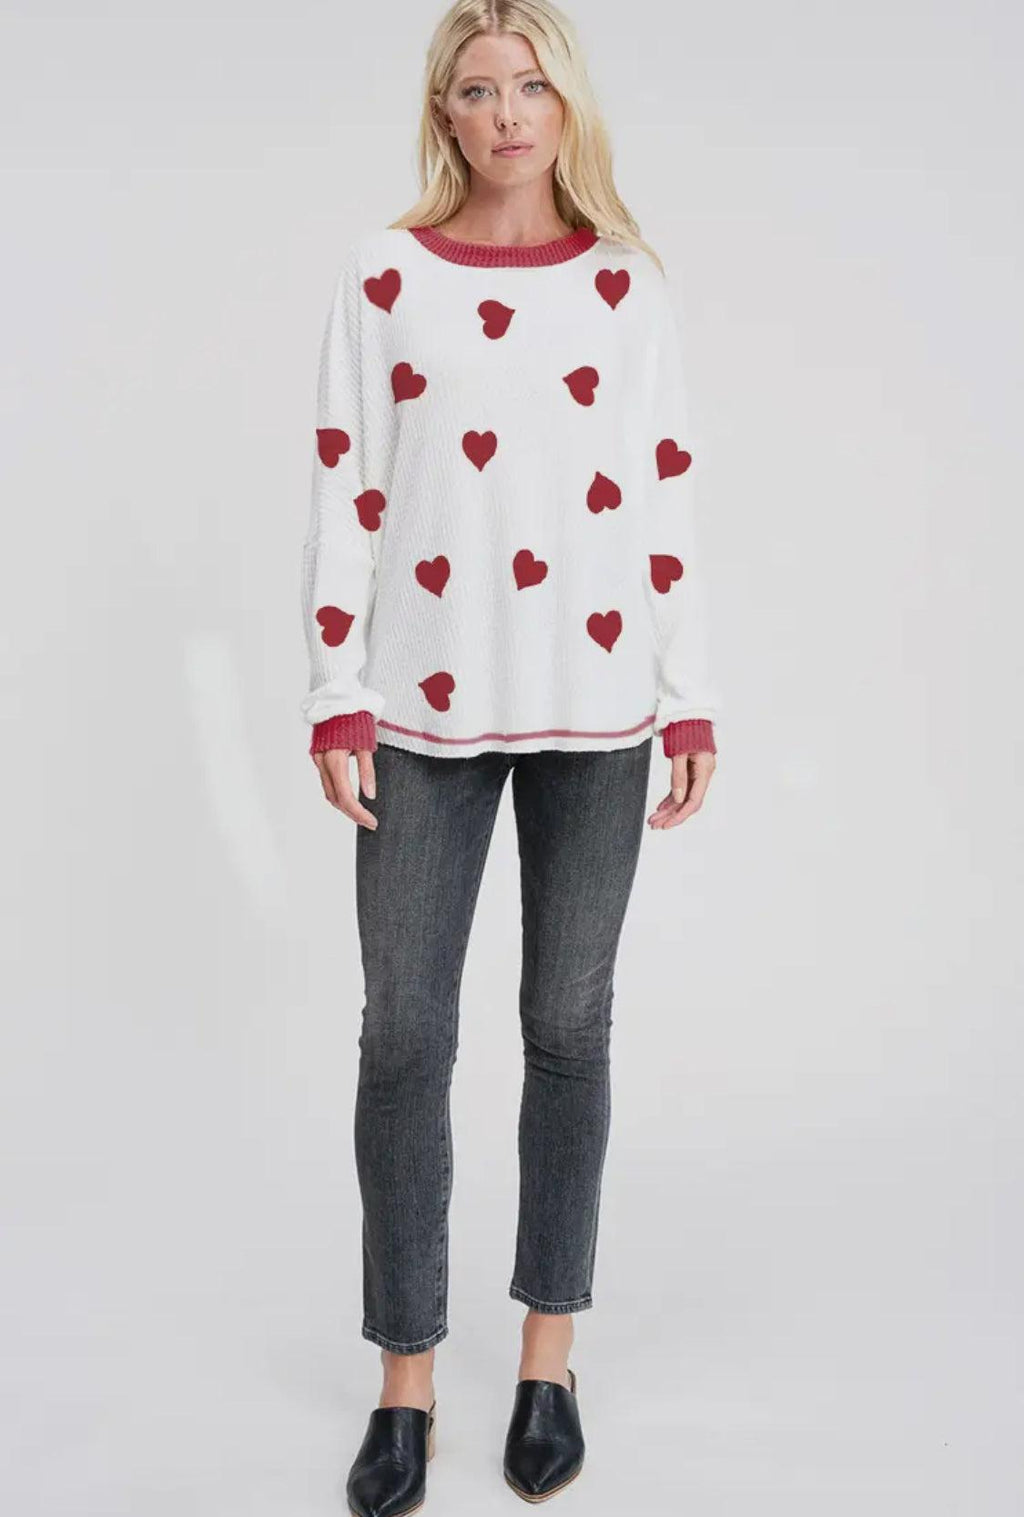 Hearts Top-110 Long Sleeve Tops-Heart Top, Tops, Valentines Top-Small-Red Hearts-[option4]-[option5]-[option6]-Womens-USA-Clothing-Boutique-Shop-Online-Clothes Minded